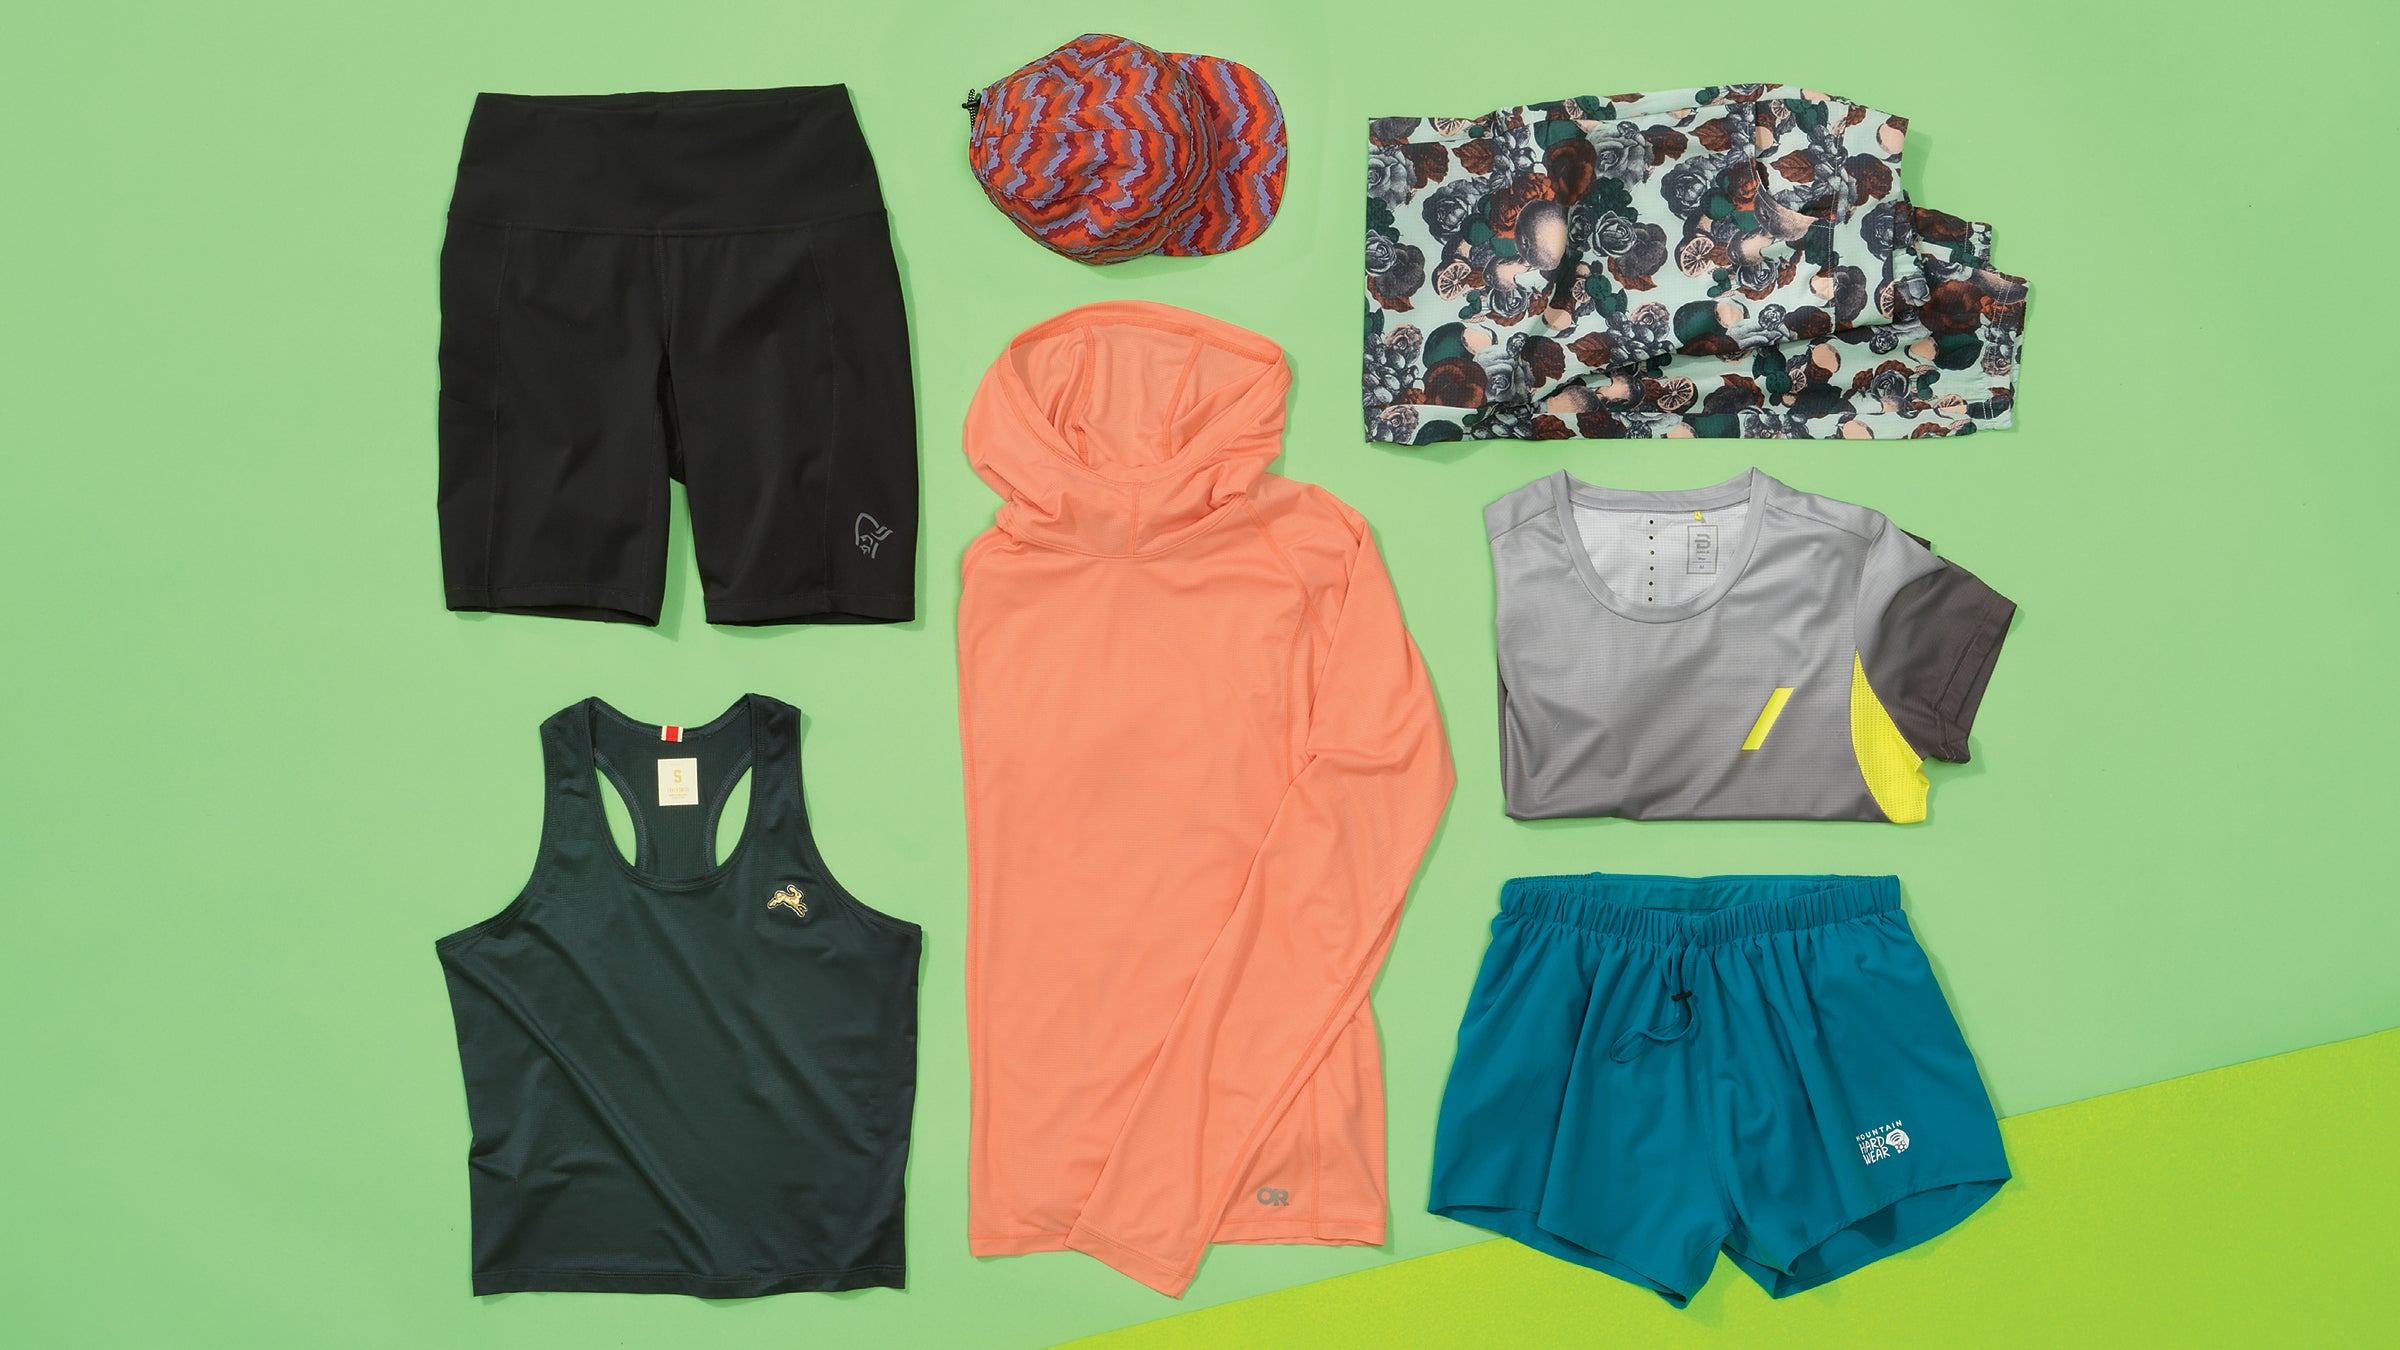 Running Clothes, Running Outfits & Apparel